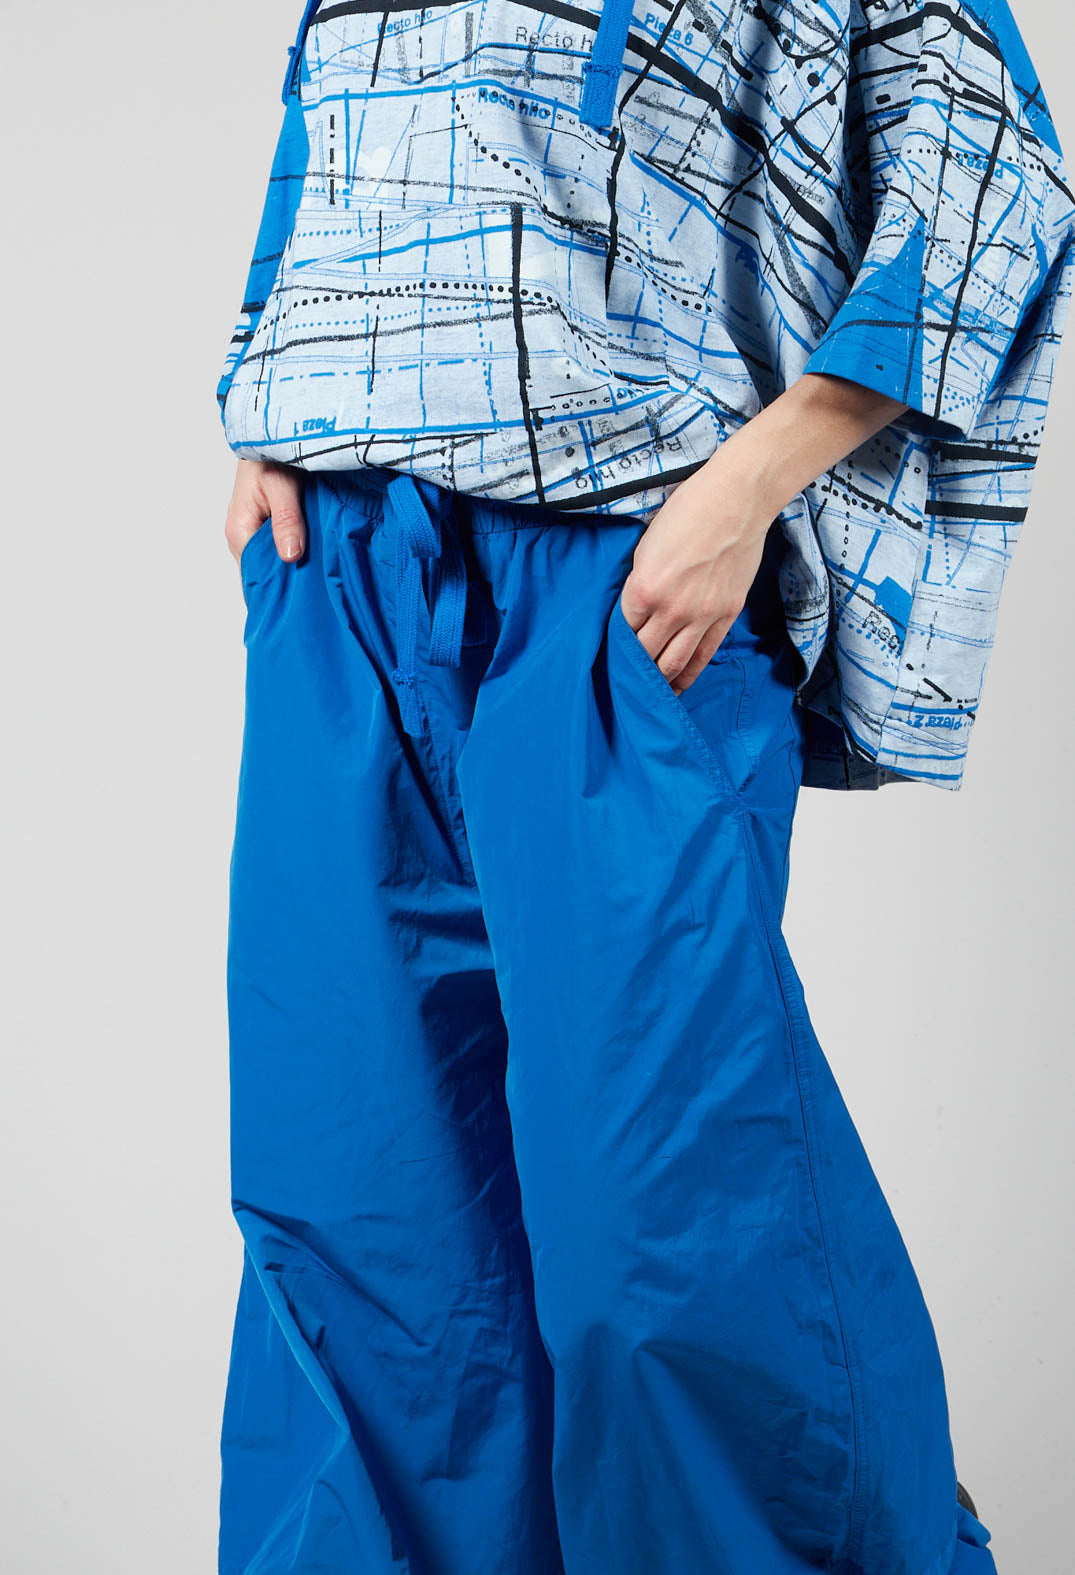 Wide Tulip Shape Trousers with Elasticated Waist in Blueberry